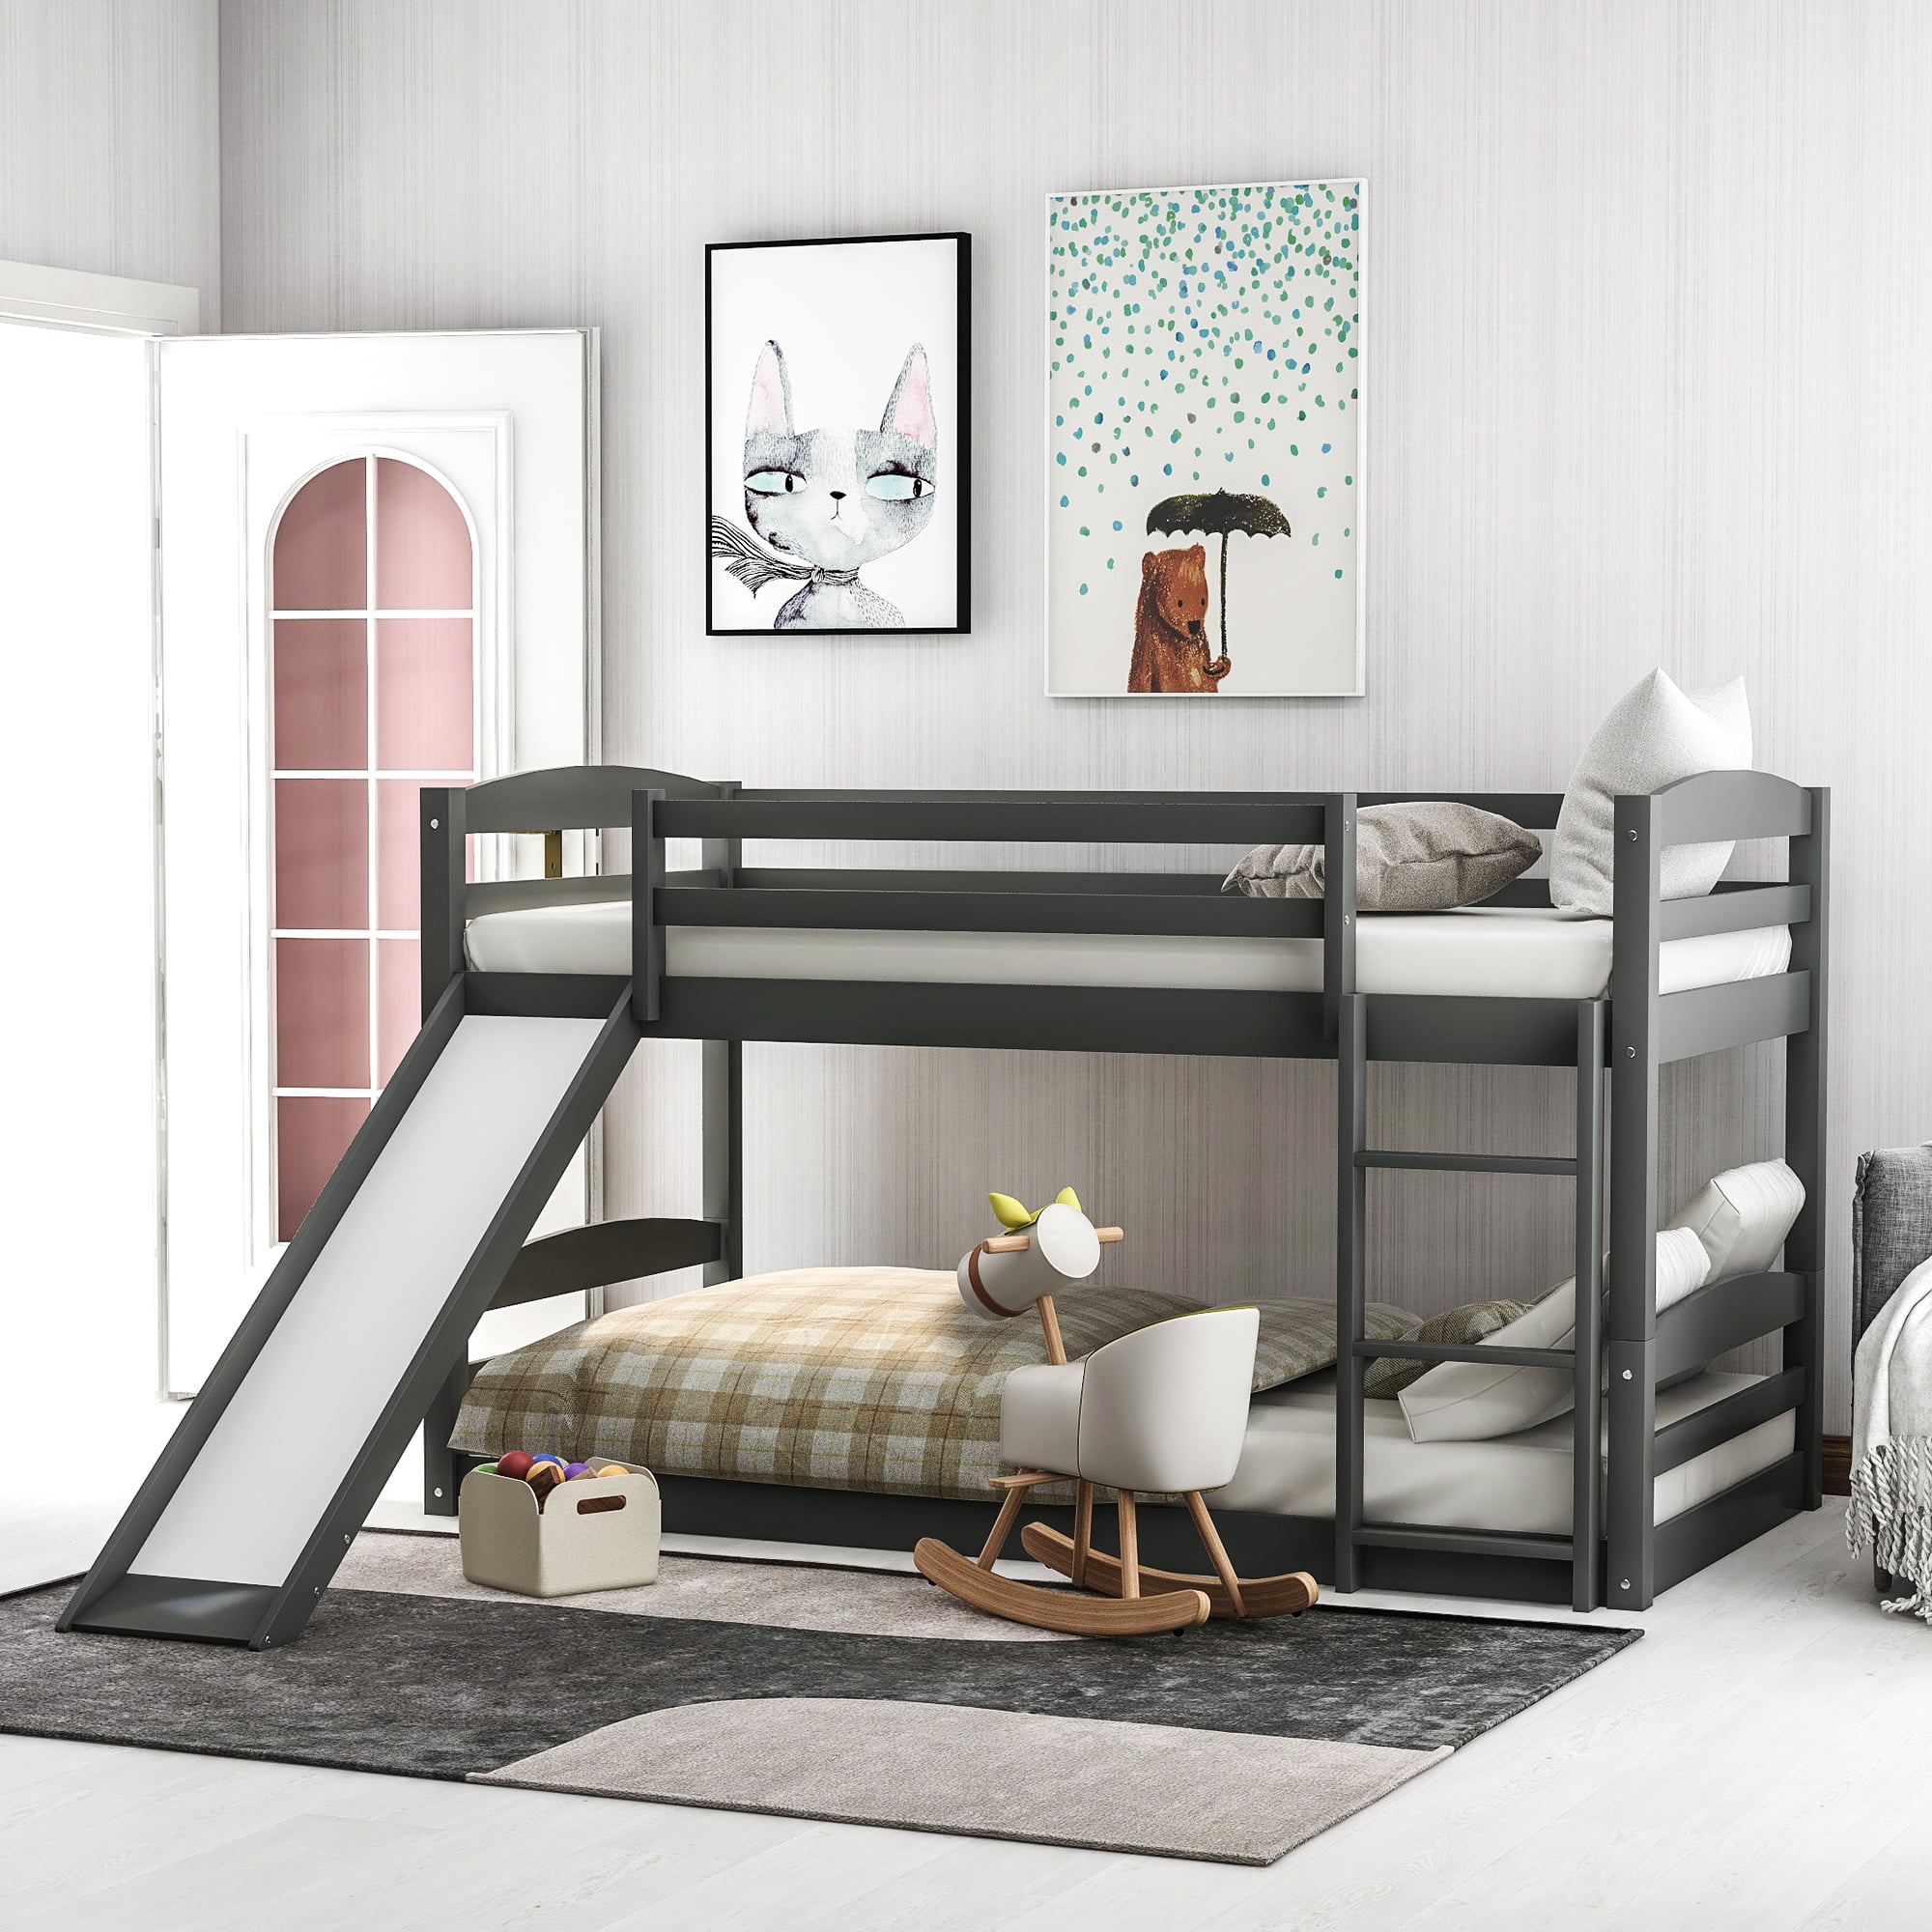 Twin Over Low Bunk Bed With Slide, A Bunk Bed With A Slide